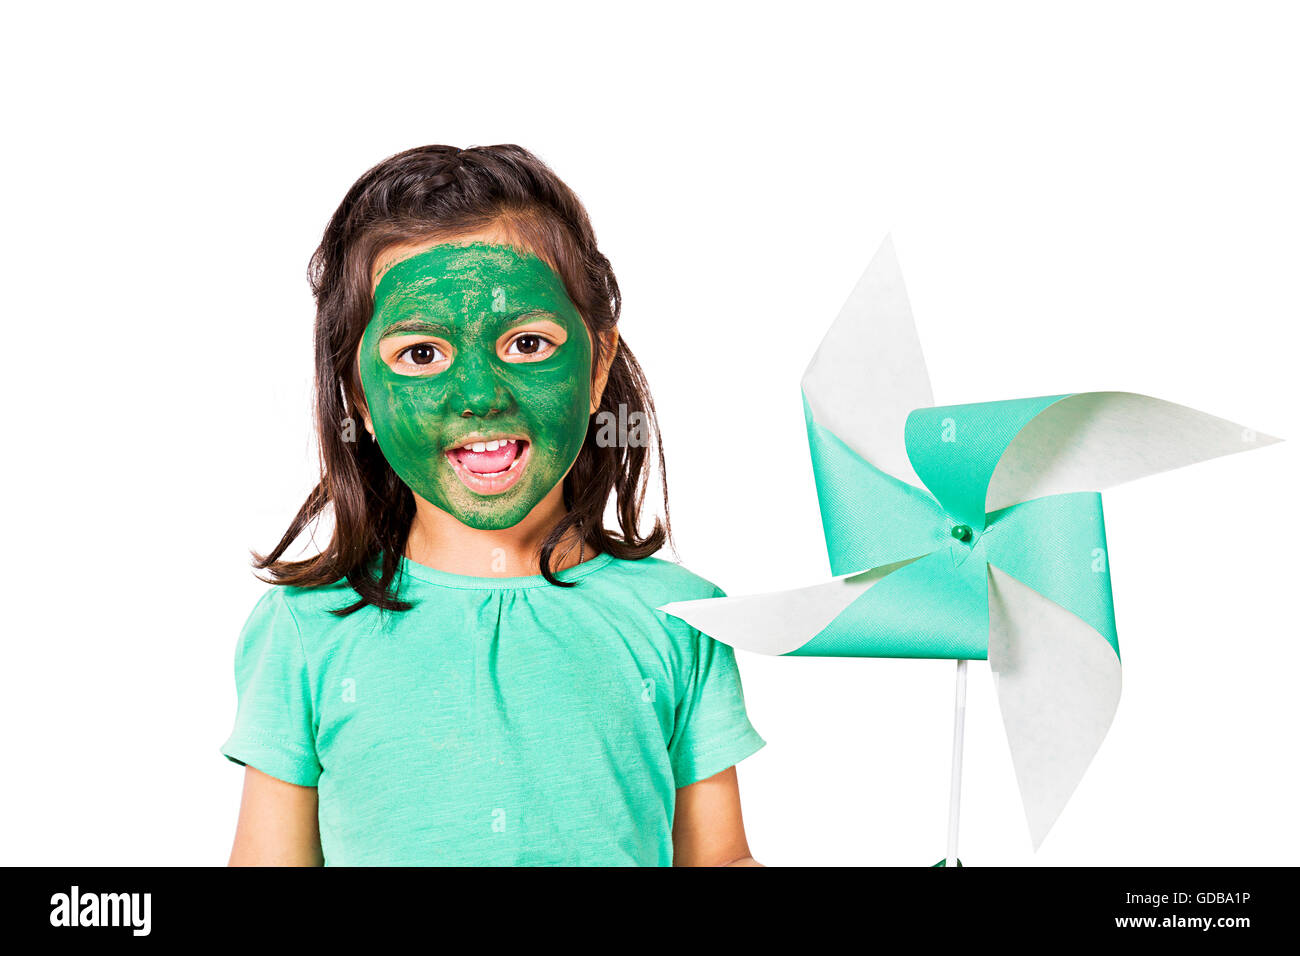 1 indian Kid girl face paint Standing and showing Pinwheel Stock Photo